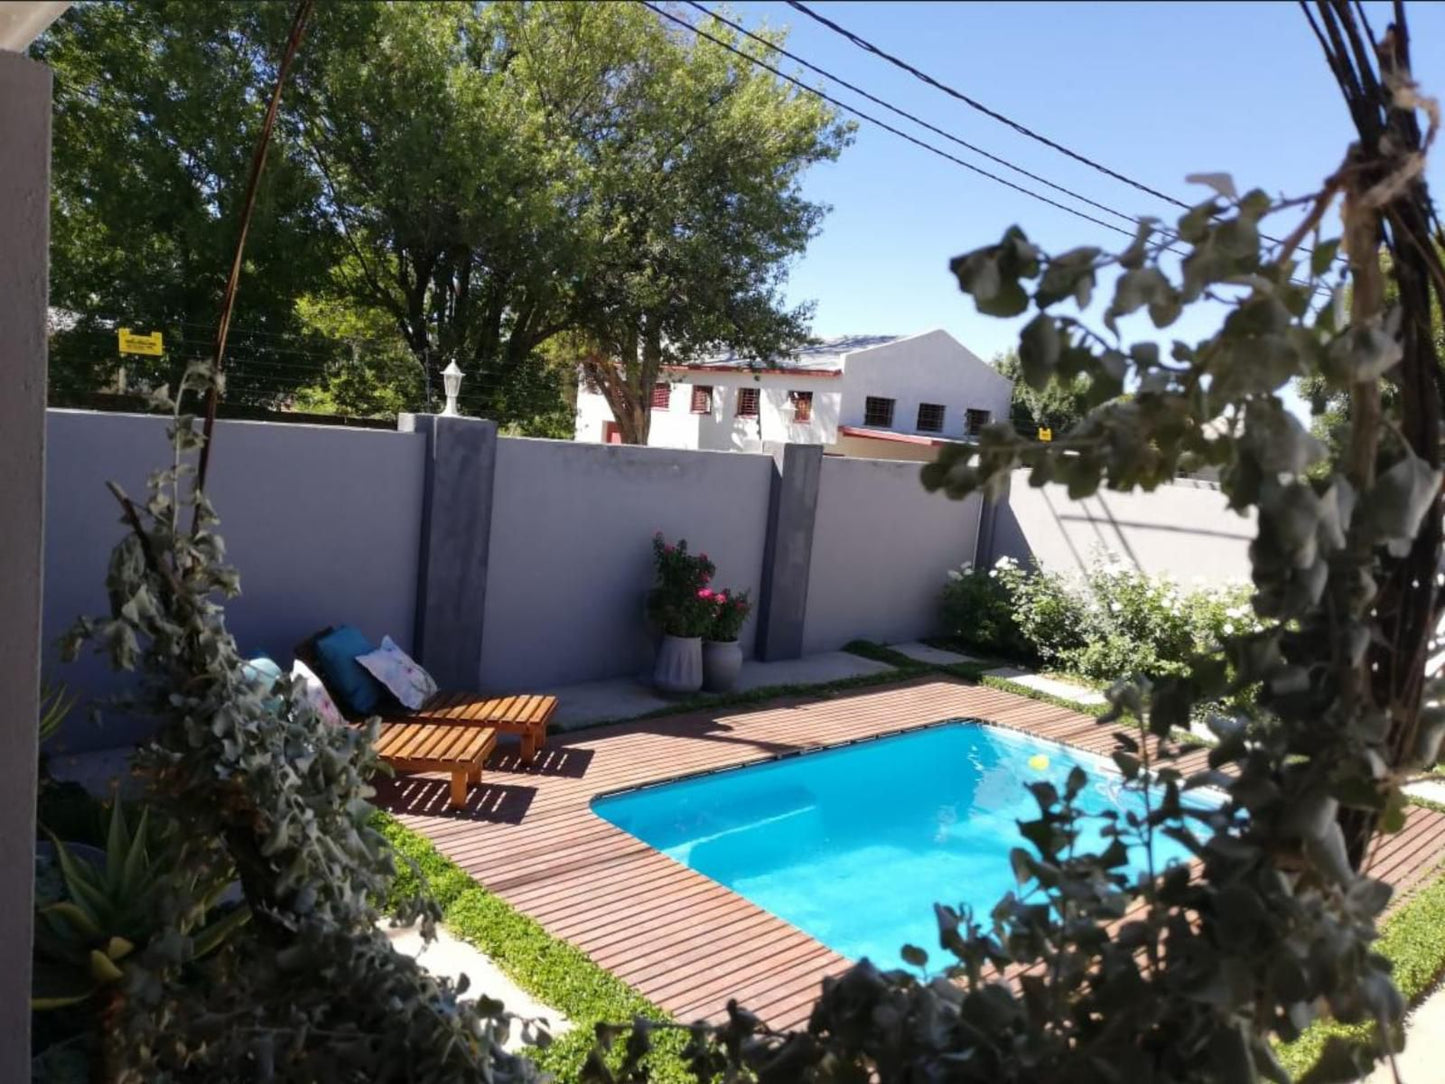 Three Birds Country House Richmond Northern Cape Northern Cape South Africa House, Building, Architecture, Garden, Nature, Plant, Swimming Pool